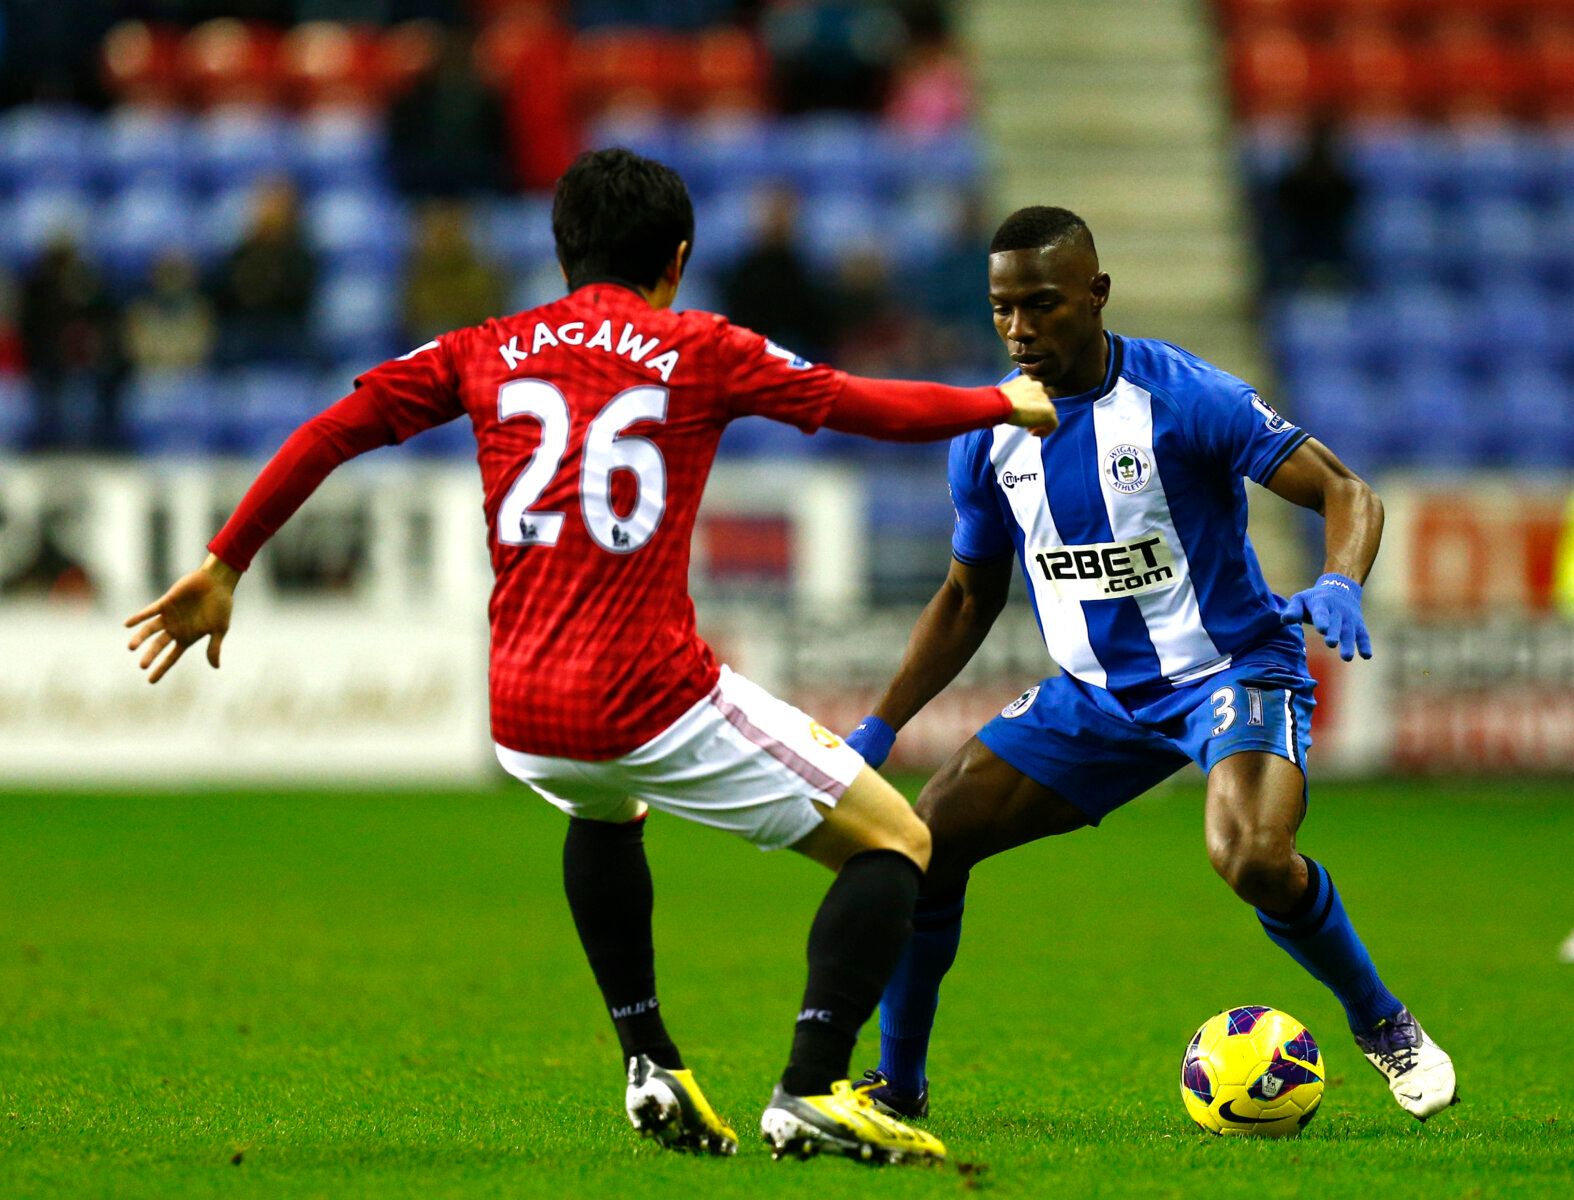 Football - Wigan Athletic v Manchester United - Barclays Premier League - DW Stadium - 12/13 - 1/1/13 
Wigan Athletic's Maynor Figueroa (R) in action 
Mandatory Credit: Action Images / Jason Cairnduff 
EDITORIAL USE ONLY. No use with unauthorized audio, video, data, fixture lists, club/league logos or live services. Online in-match use limited to 45 images, no video emulation. No use in betting, games or single club/league/player publications.  Please contact your account representative for furt